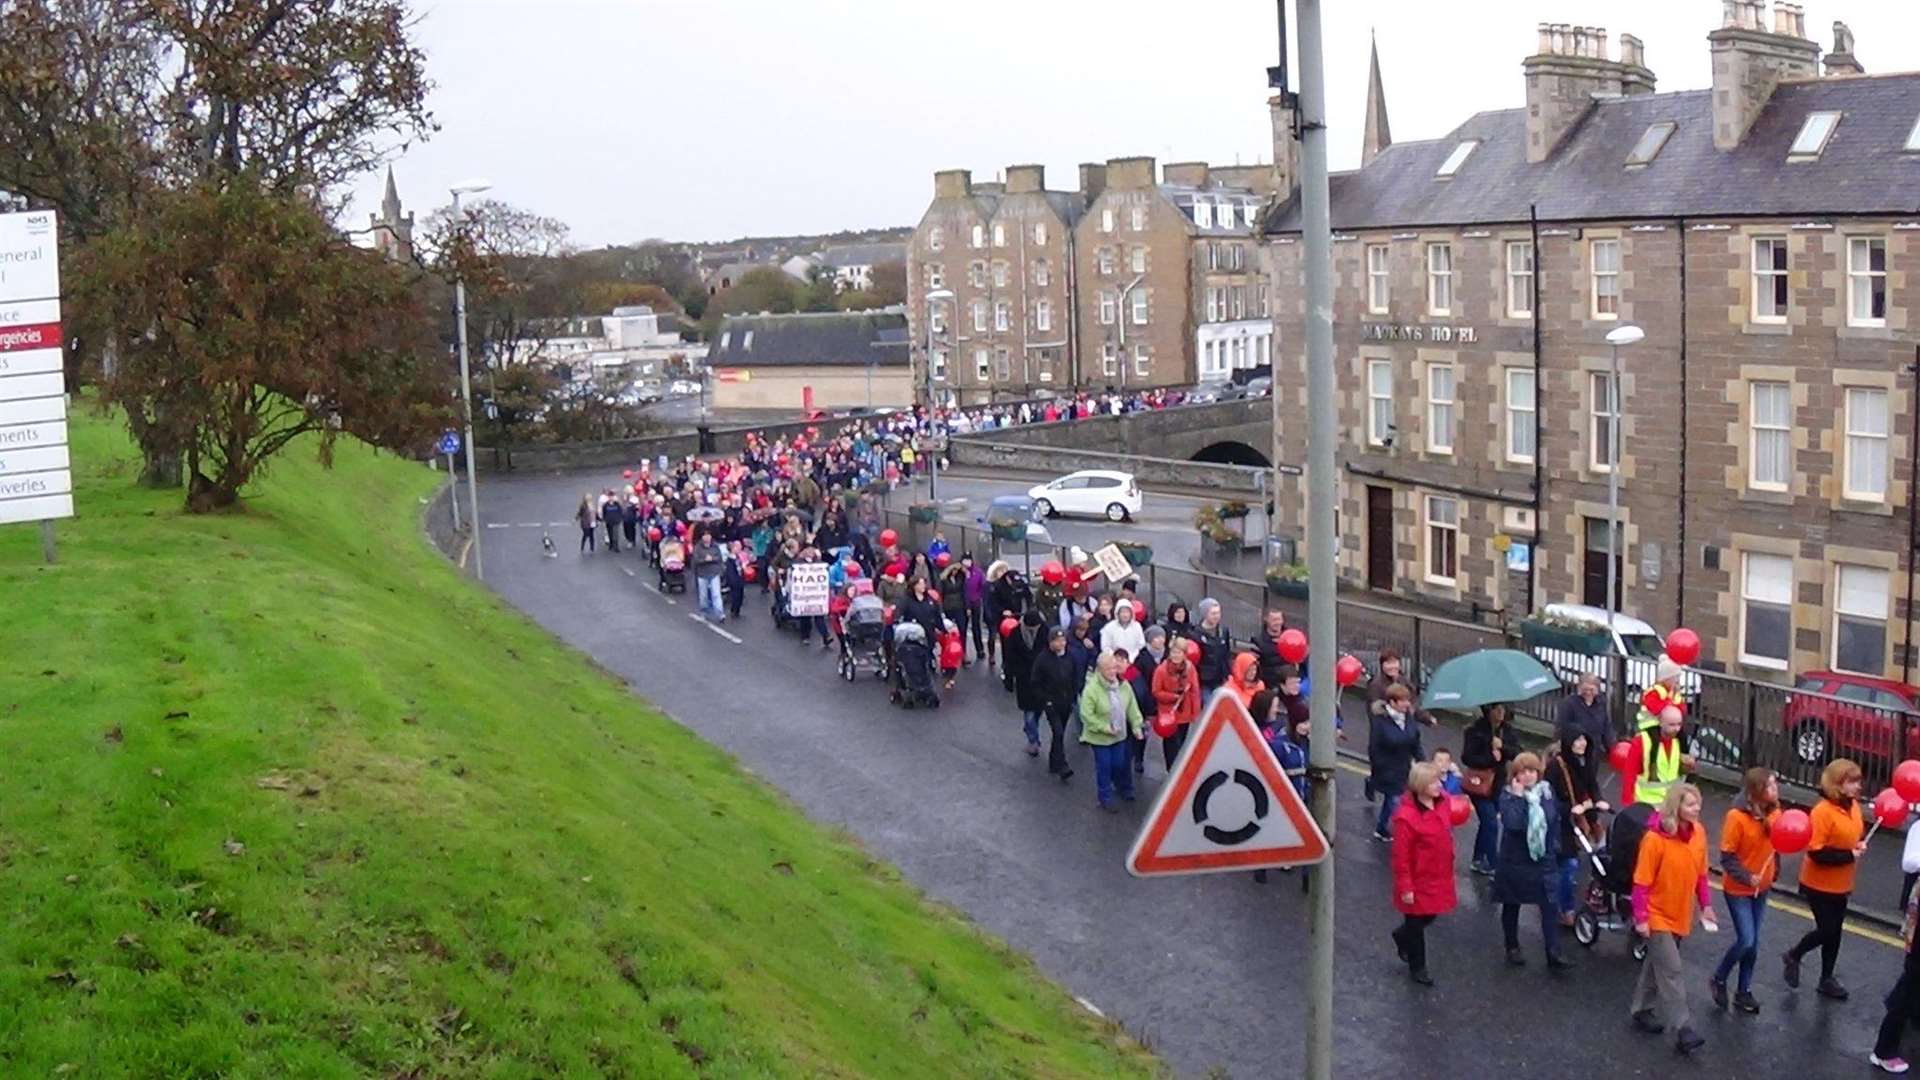 Wick Town Centre was brought to a standstill during the protest. Photo: Will Clark